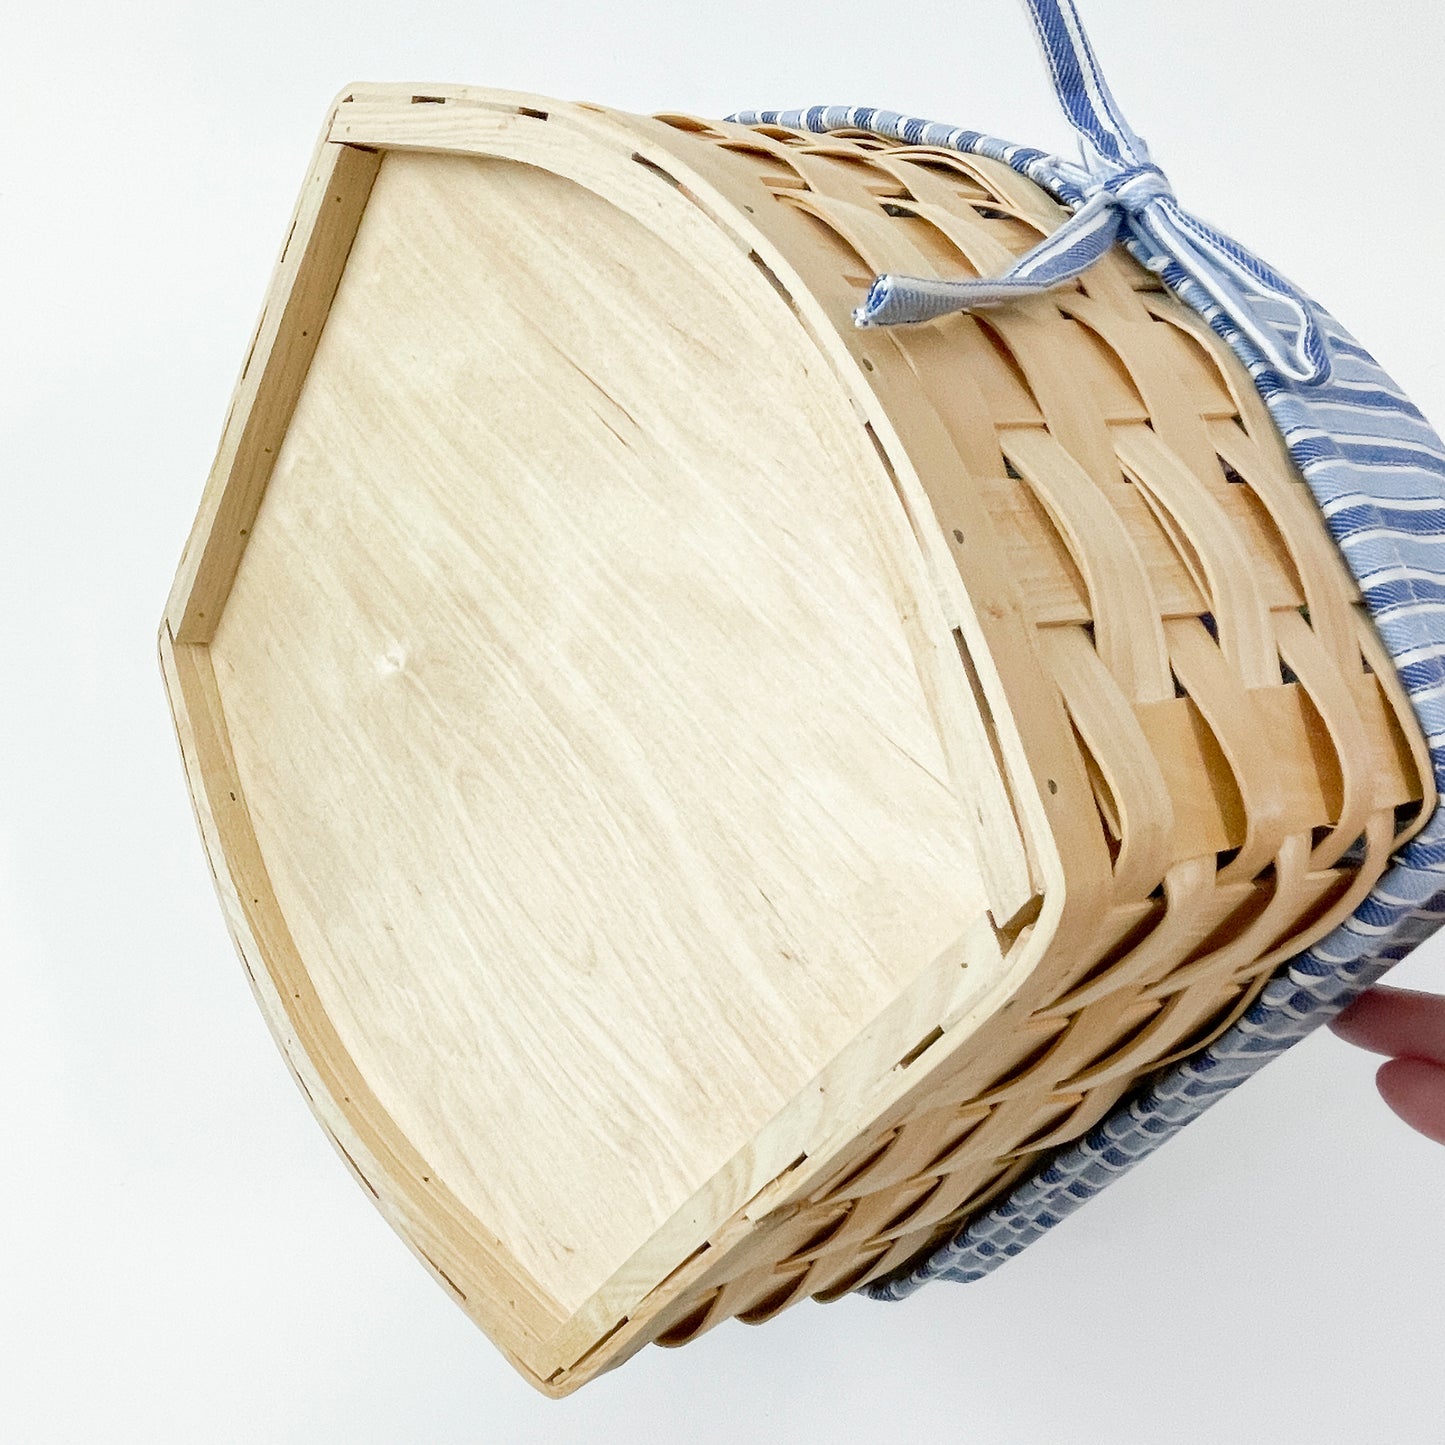 Wood chip woven basket with blue liner